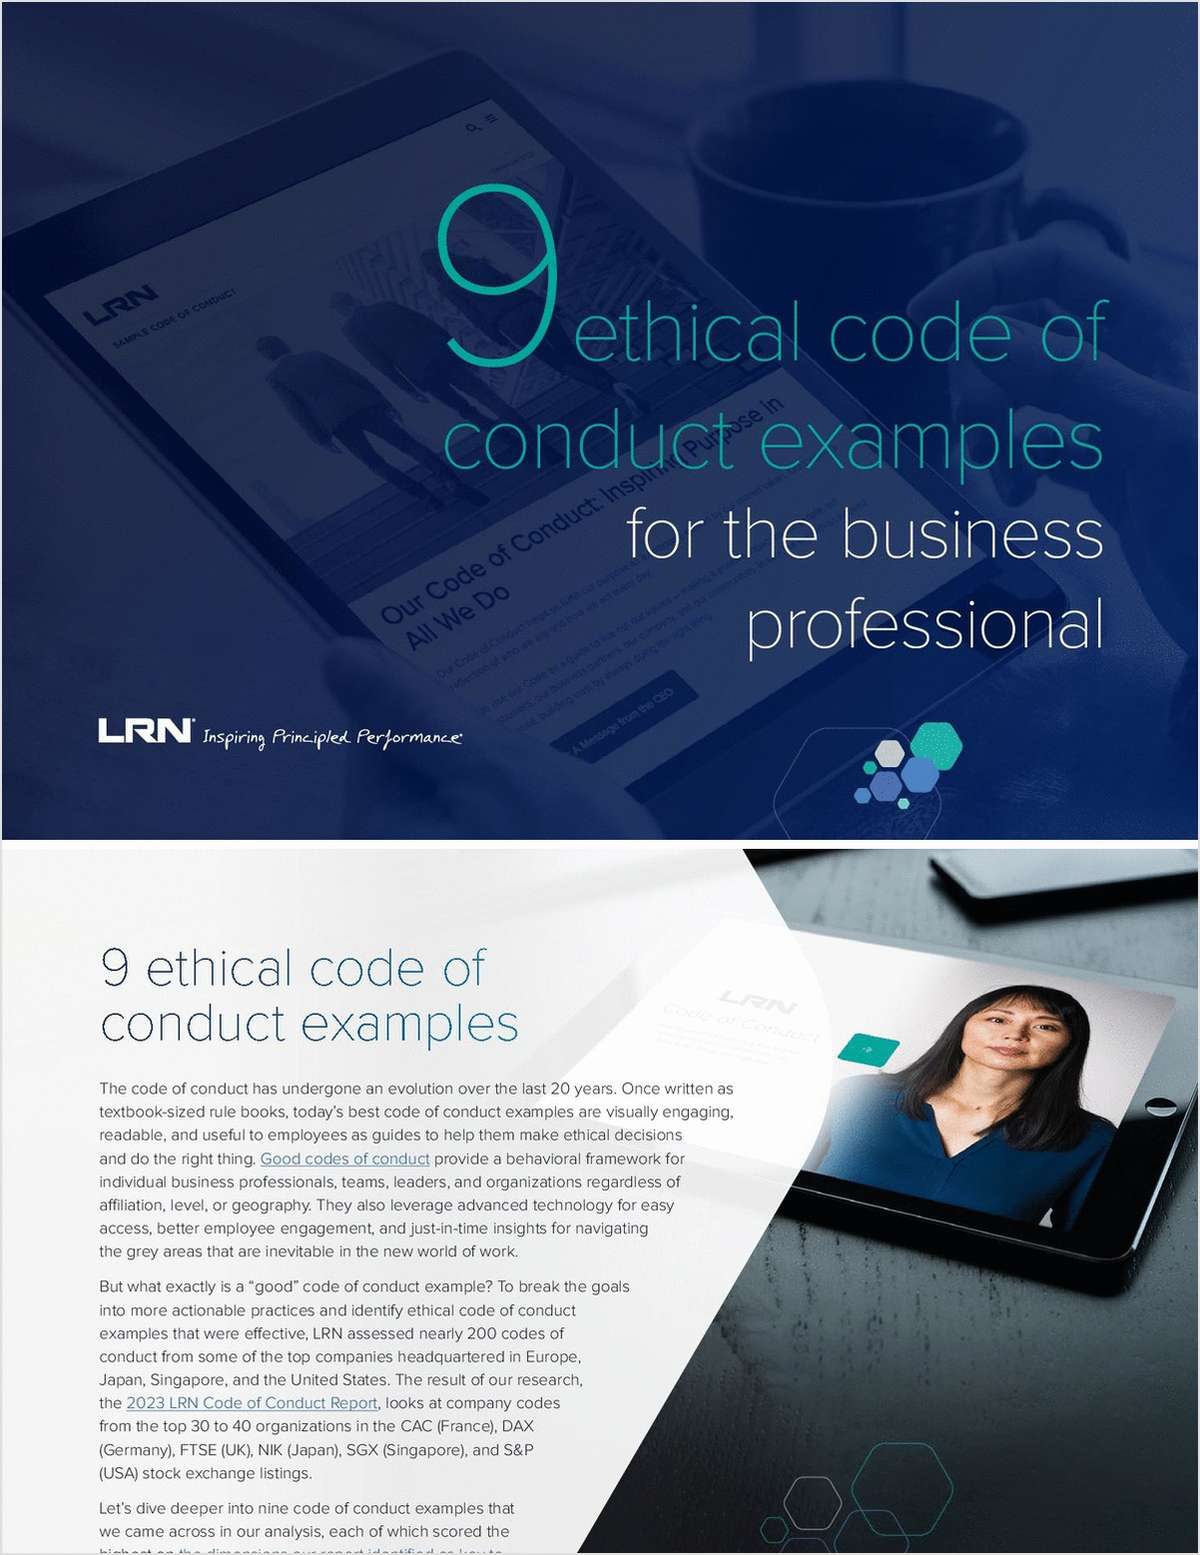 Find out what features make a code of conduct most effective. Hint: it’s not just the rules.